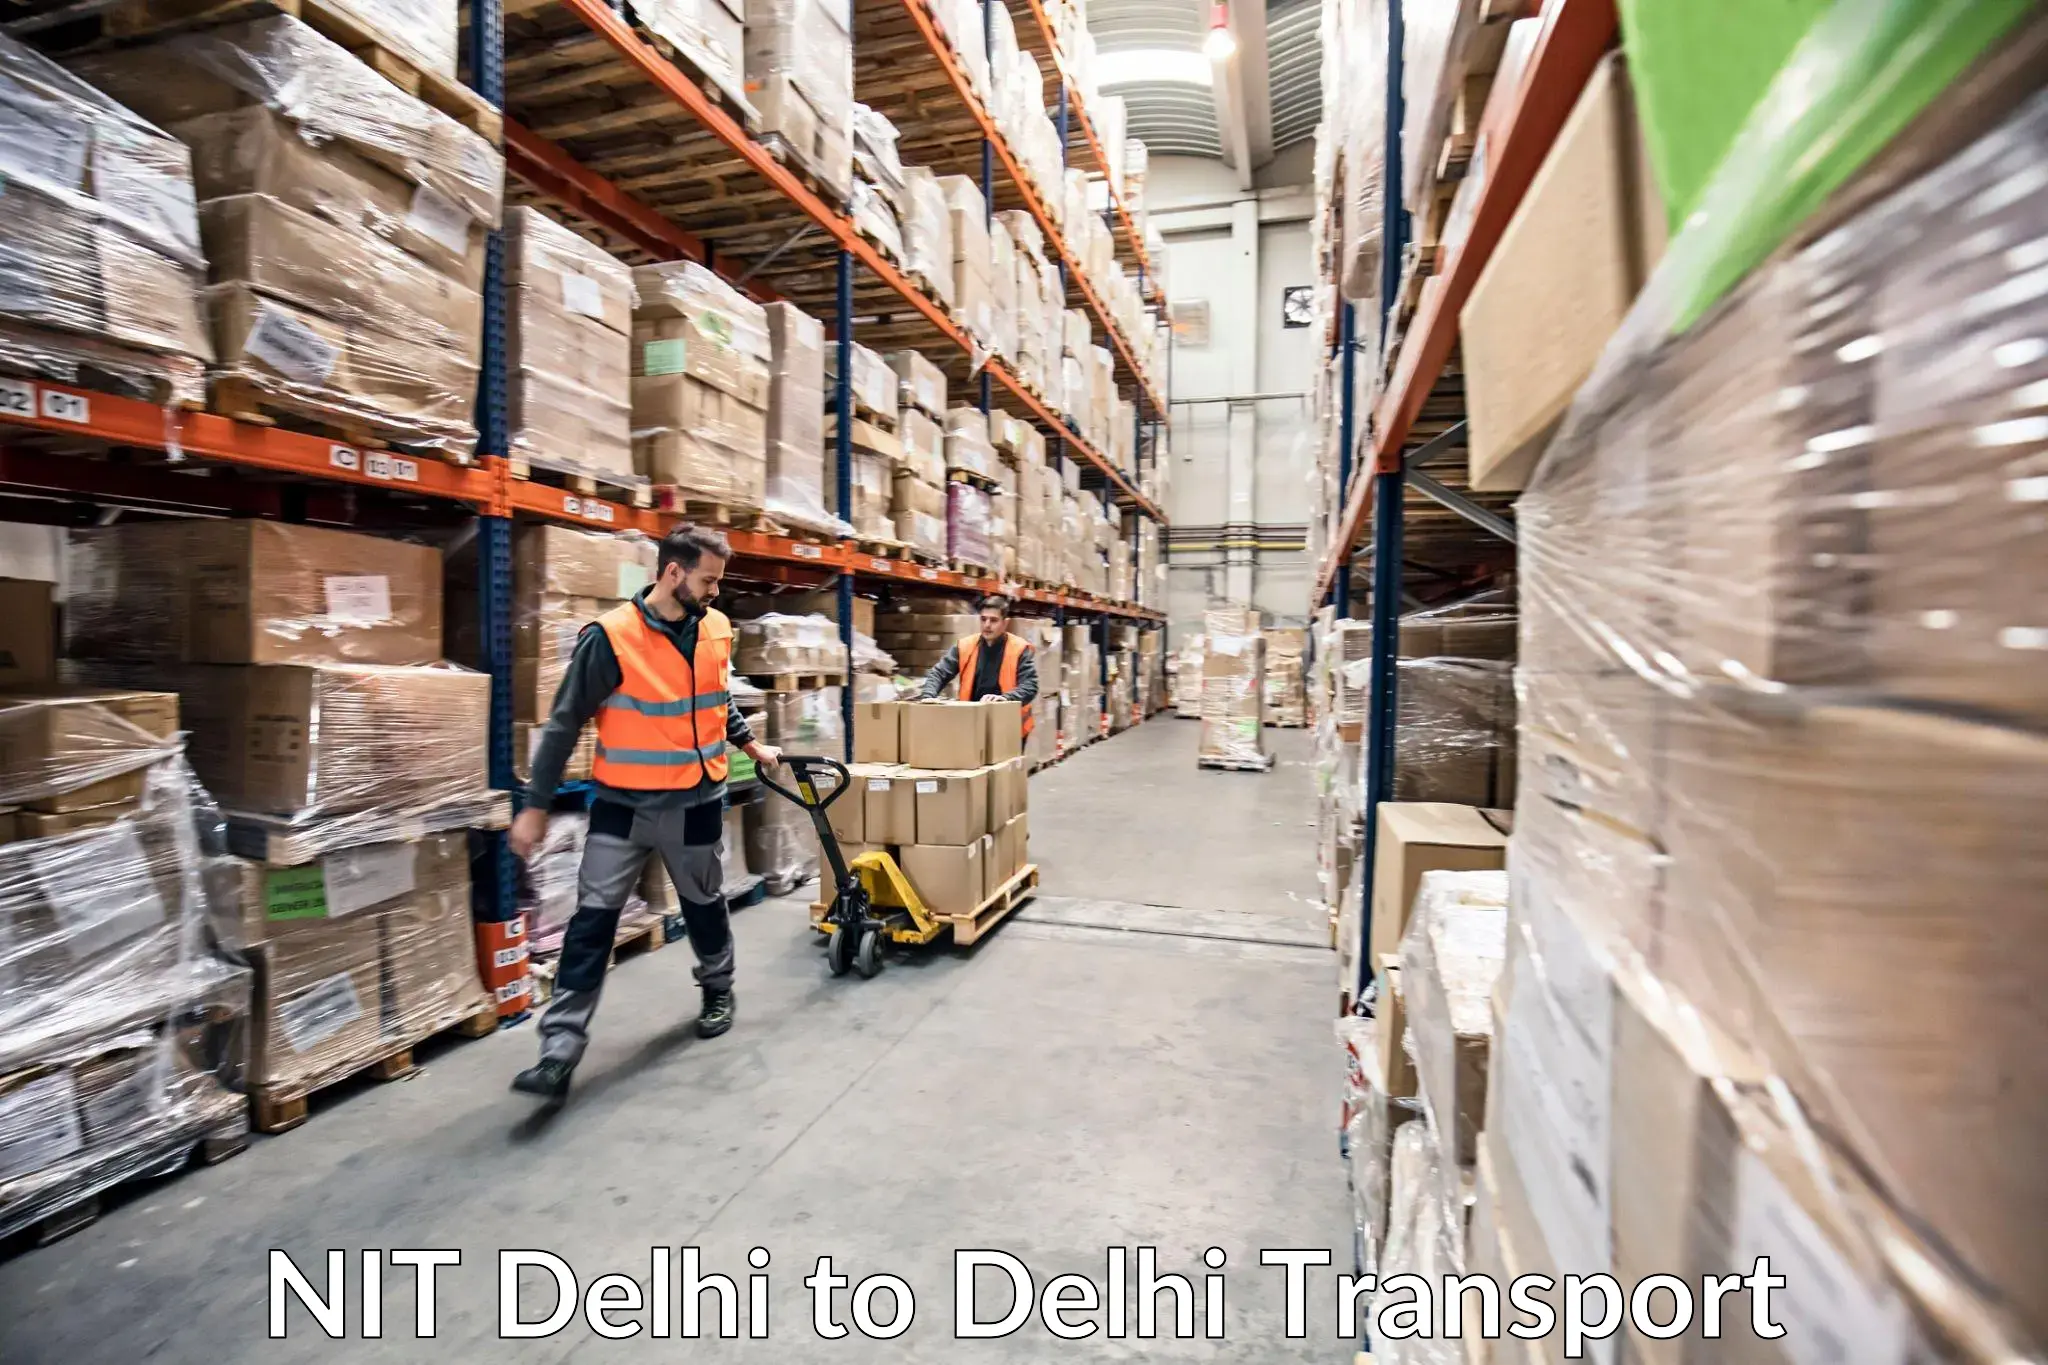 Goods delivery service NIT Delhi to NCR